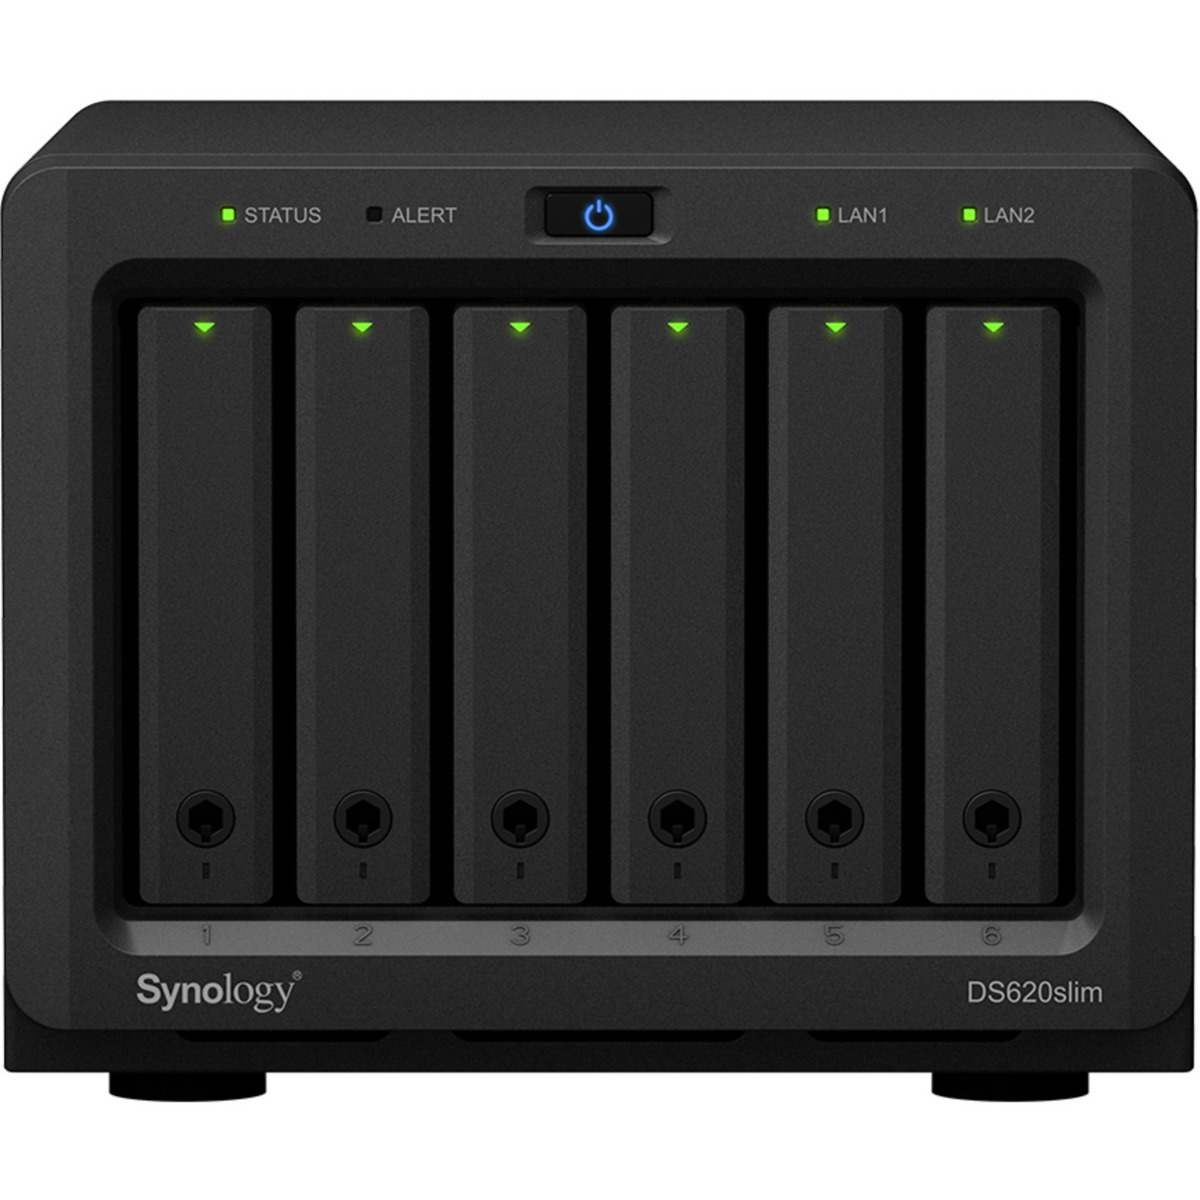 Synology DiskStation DS620slim 16tb 6-Bay Desktop Multimedia / Power User / Business NAS - Network Attached Storage Device 4x4tb Sandisk Ultra 3D SDSSDH3-4T00 2.5 560/520MB/s SATA 6Gb/s SSD CONSUMER Class Drives Installed - Burn-In Tested - FREE RAM UPGRADE DiskStation DS620slim